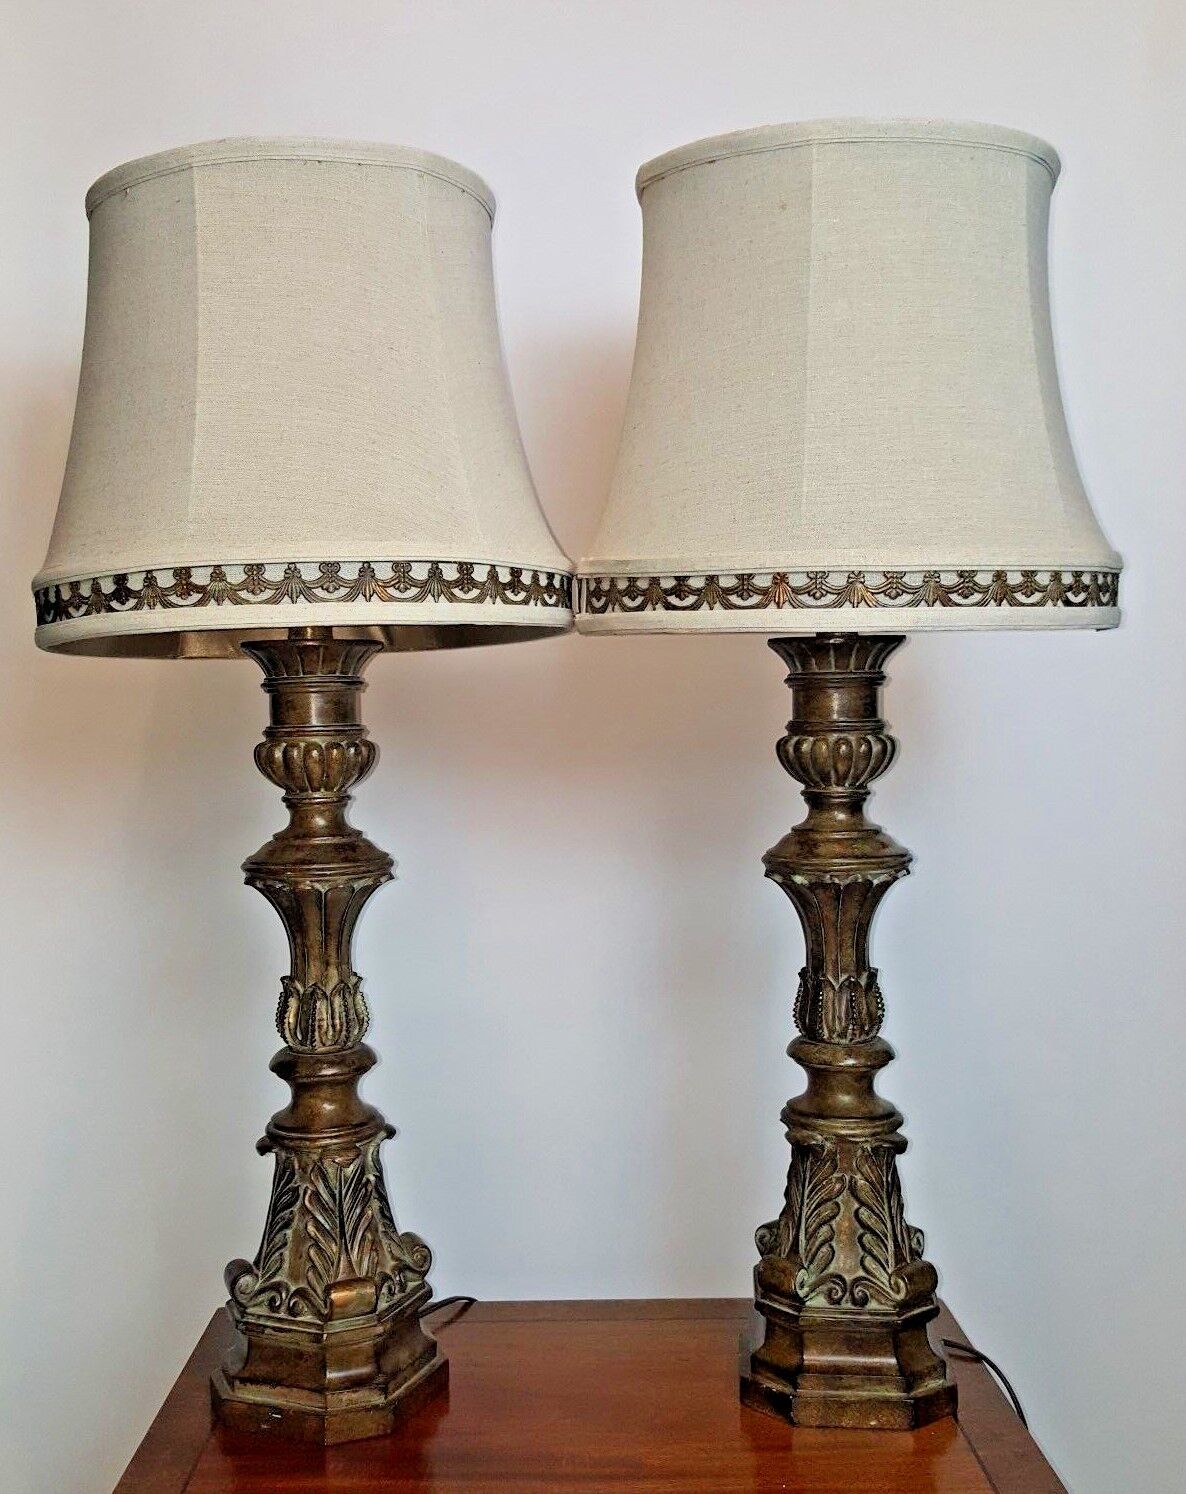  Pair of Massive Carved Style Table Lamps as is